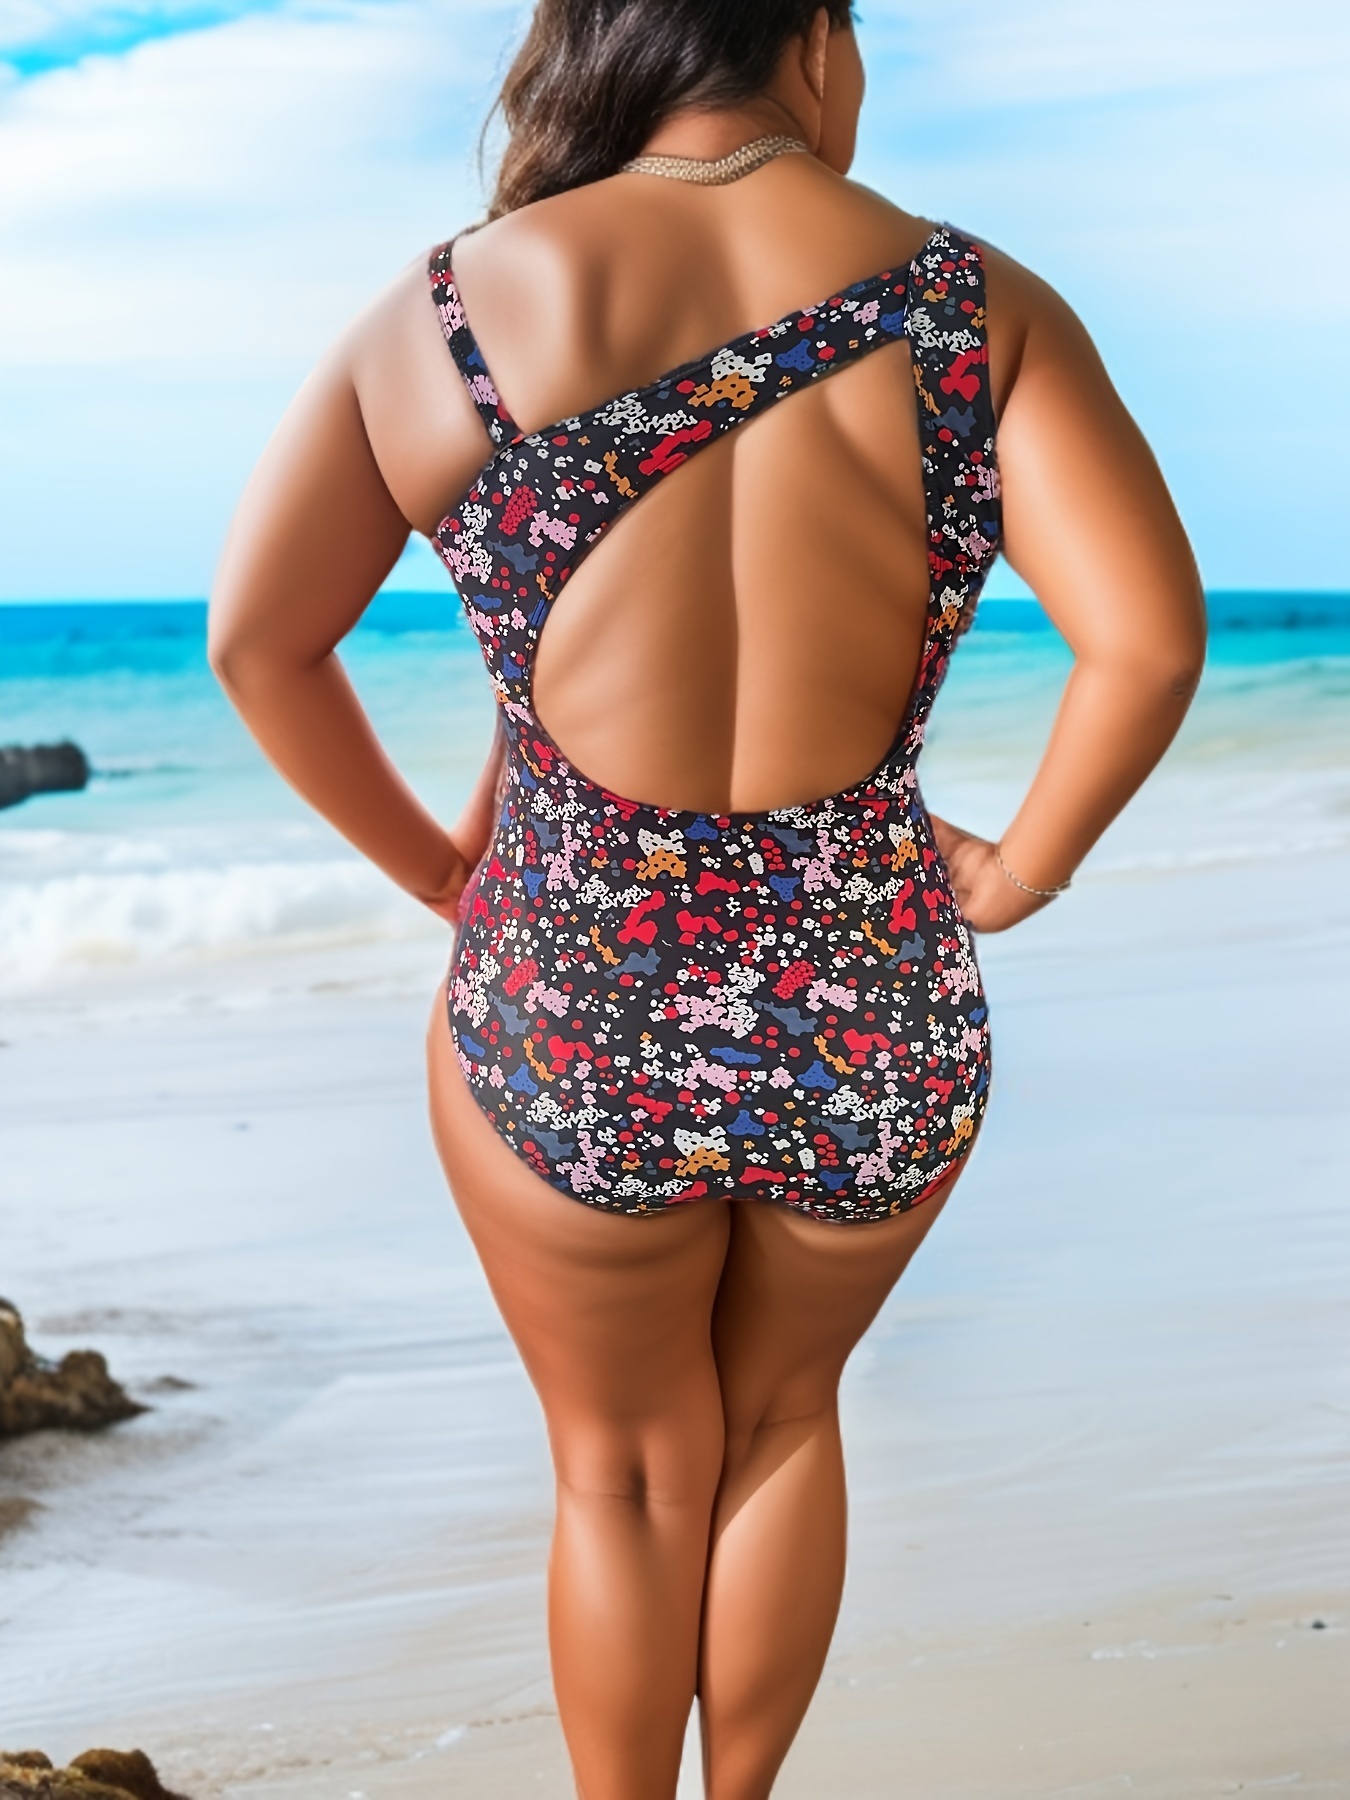 Dropship Plus Size Deep V Neck Solid One Piece Swimsuit; Women's Plus High  Stretch Vacation Boho One Piece Bathing Suit to Sell Online at a Lower  Price